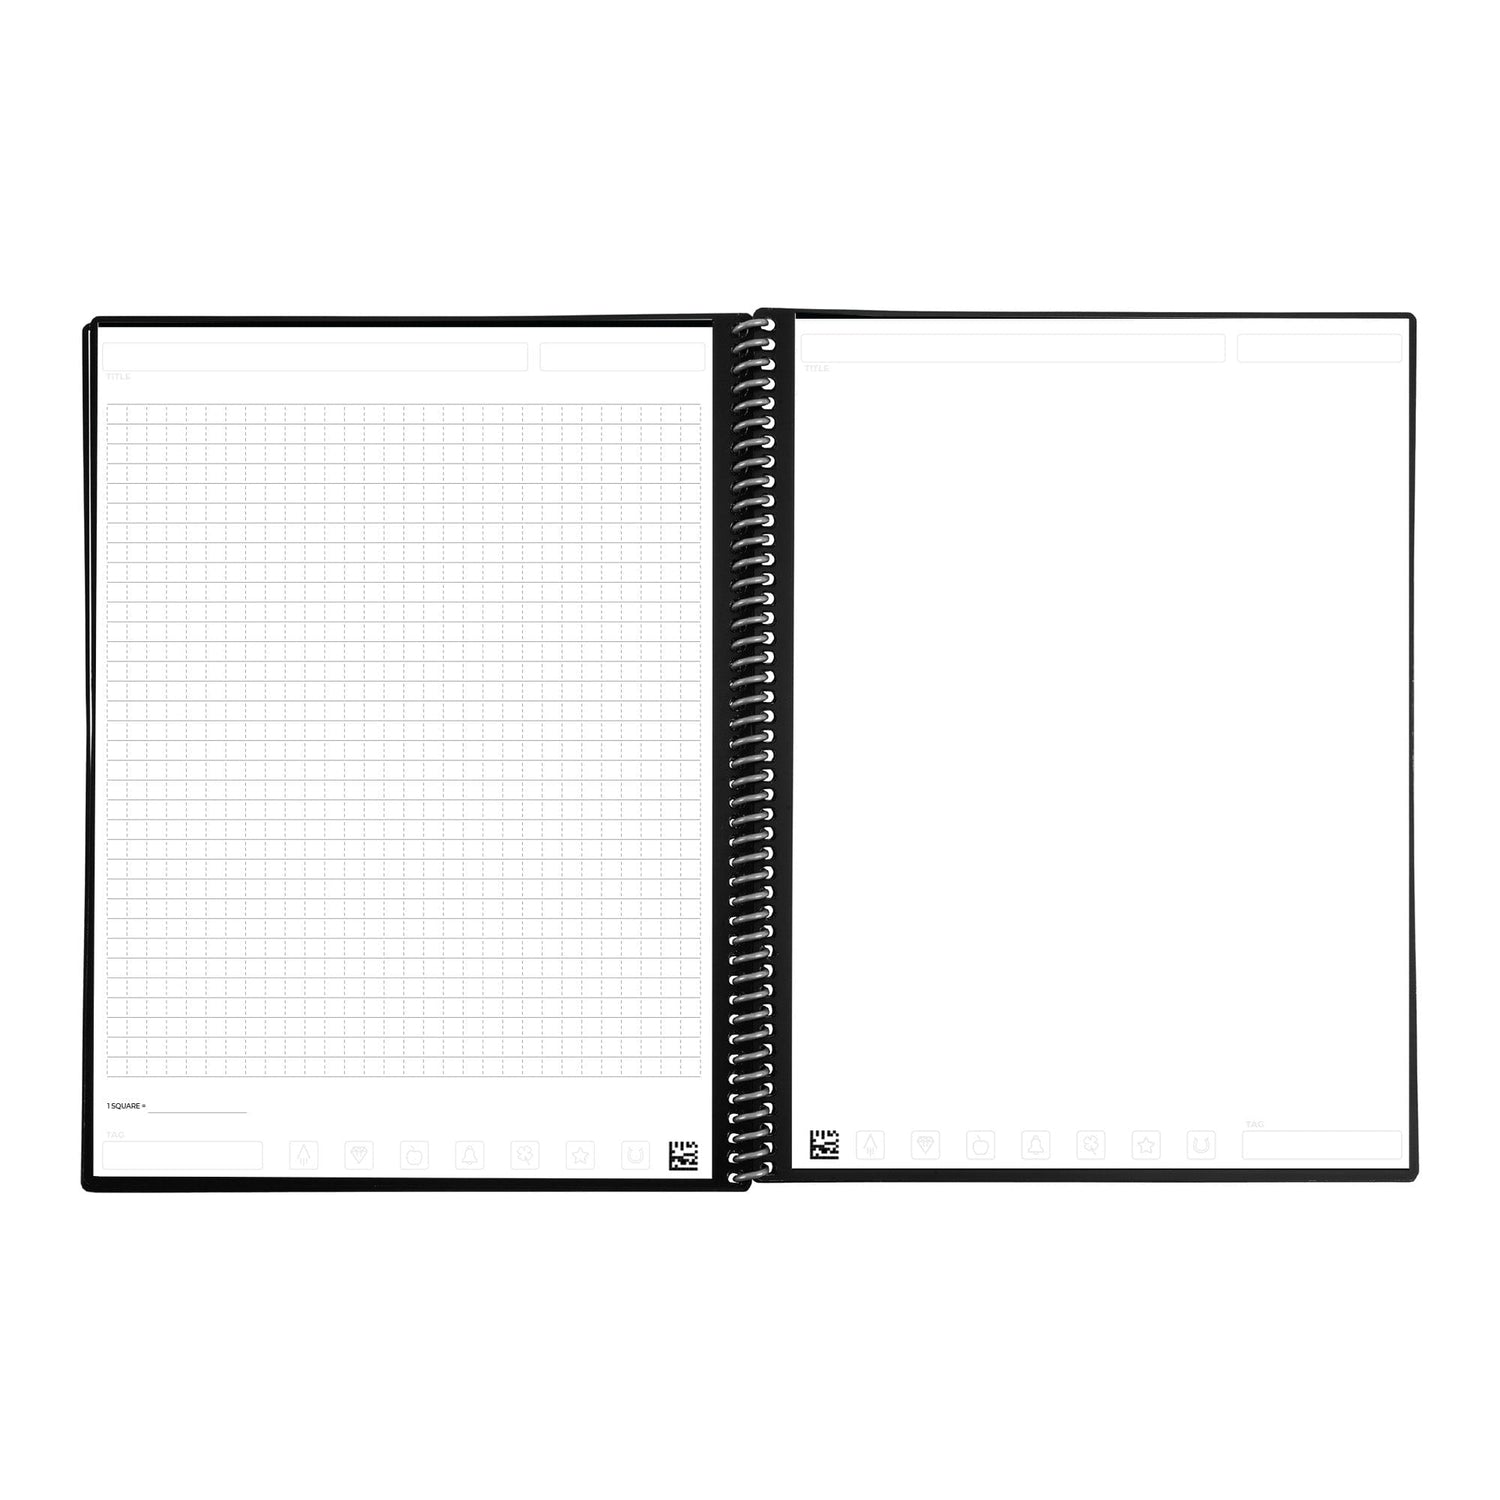 A graph page and a blank page